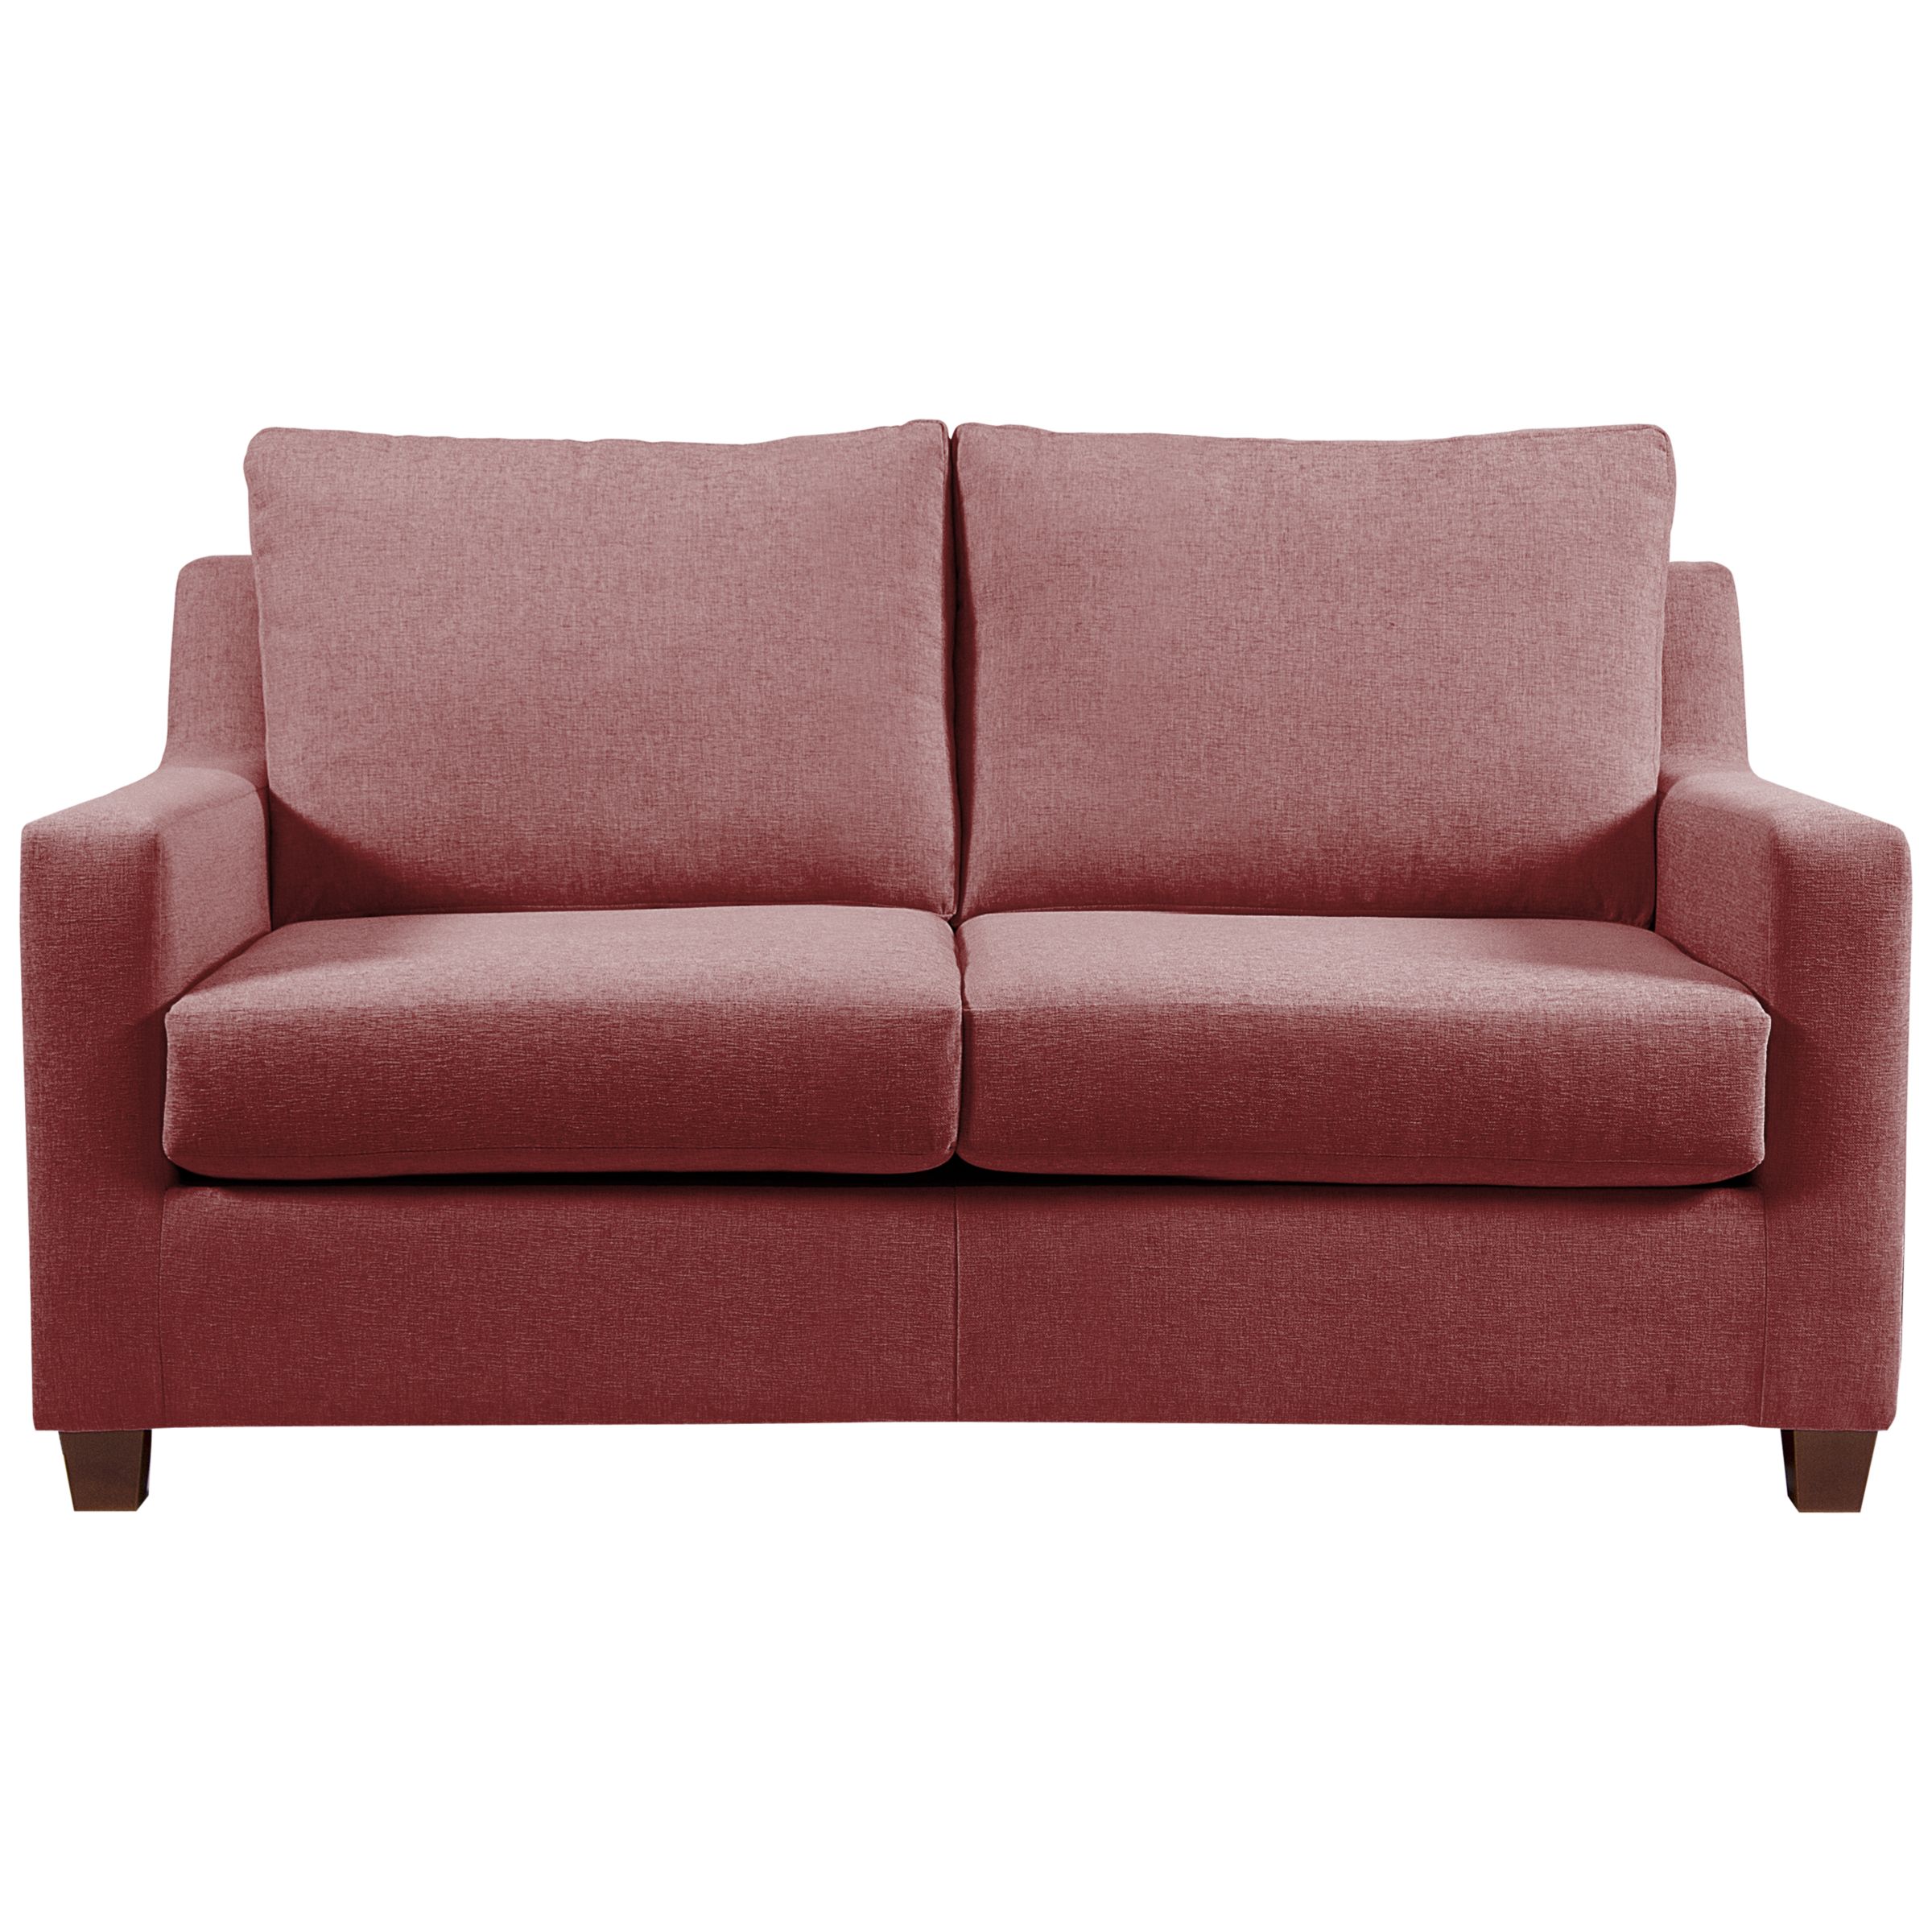 John Lewis Bizet Small Sofa Bed with Memory Foam Mattress, Red, width 158cm